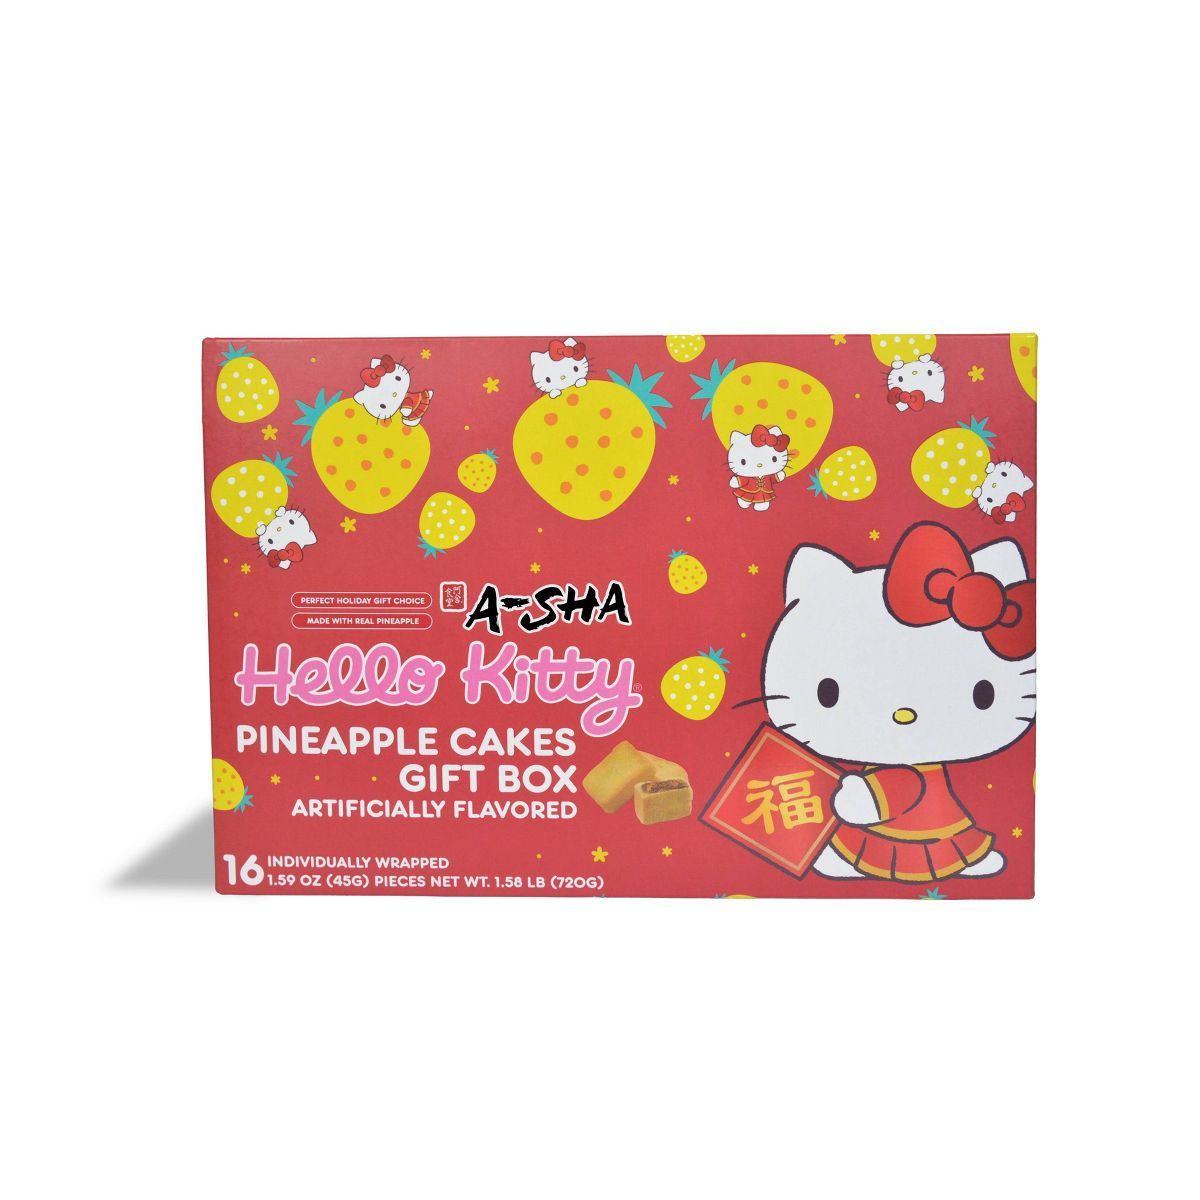 Hello Kitty Lunar New Year Pineapple Cakes - 25.4oz | Target